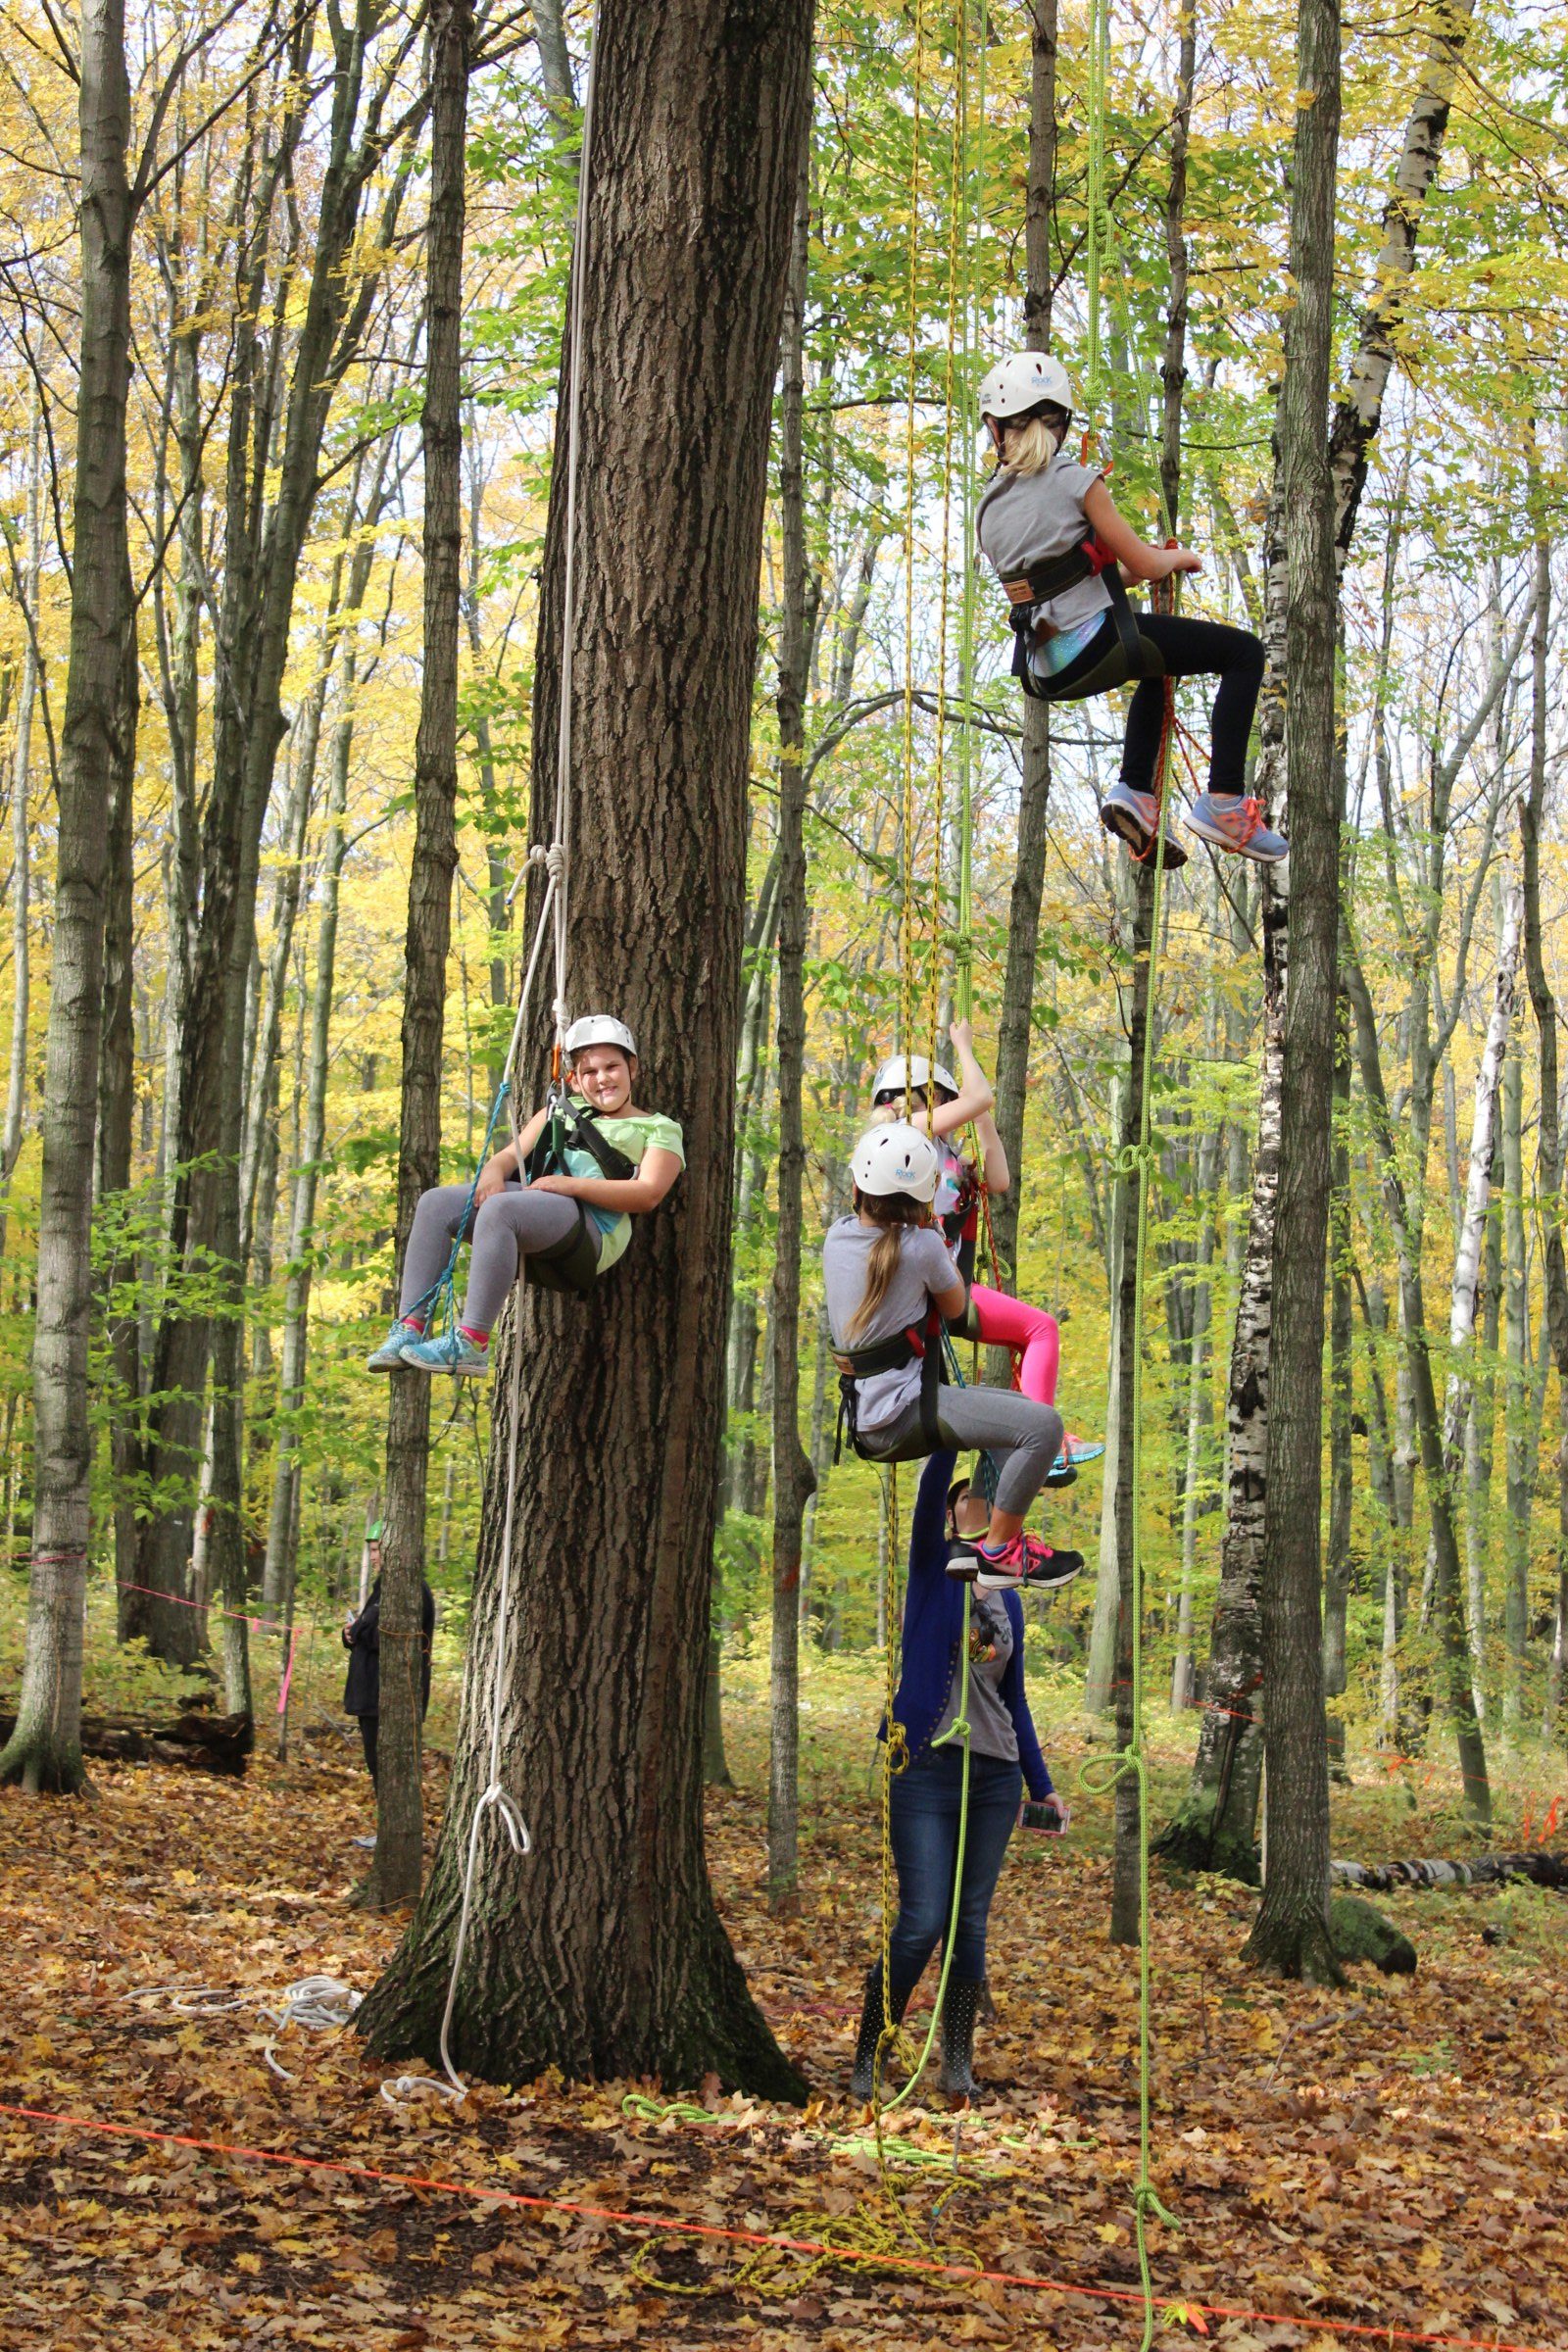 4 kids hang from ropes in a tree in the Riveredge forest